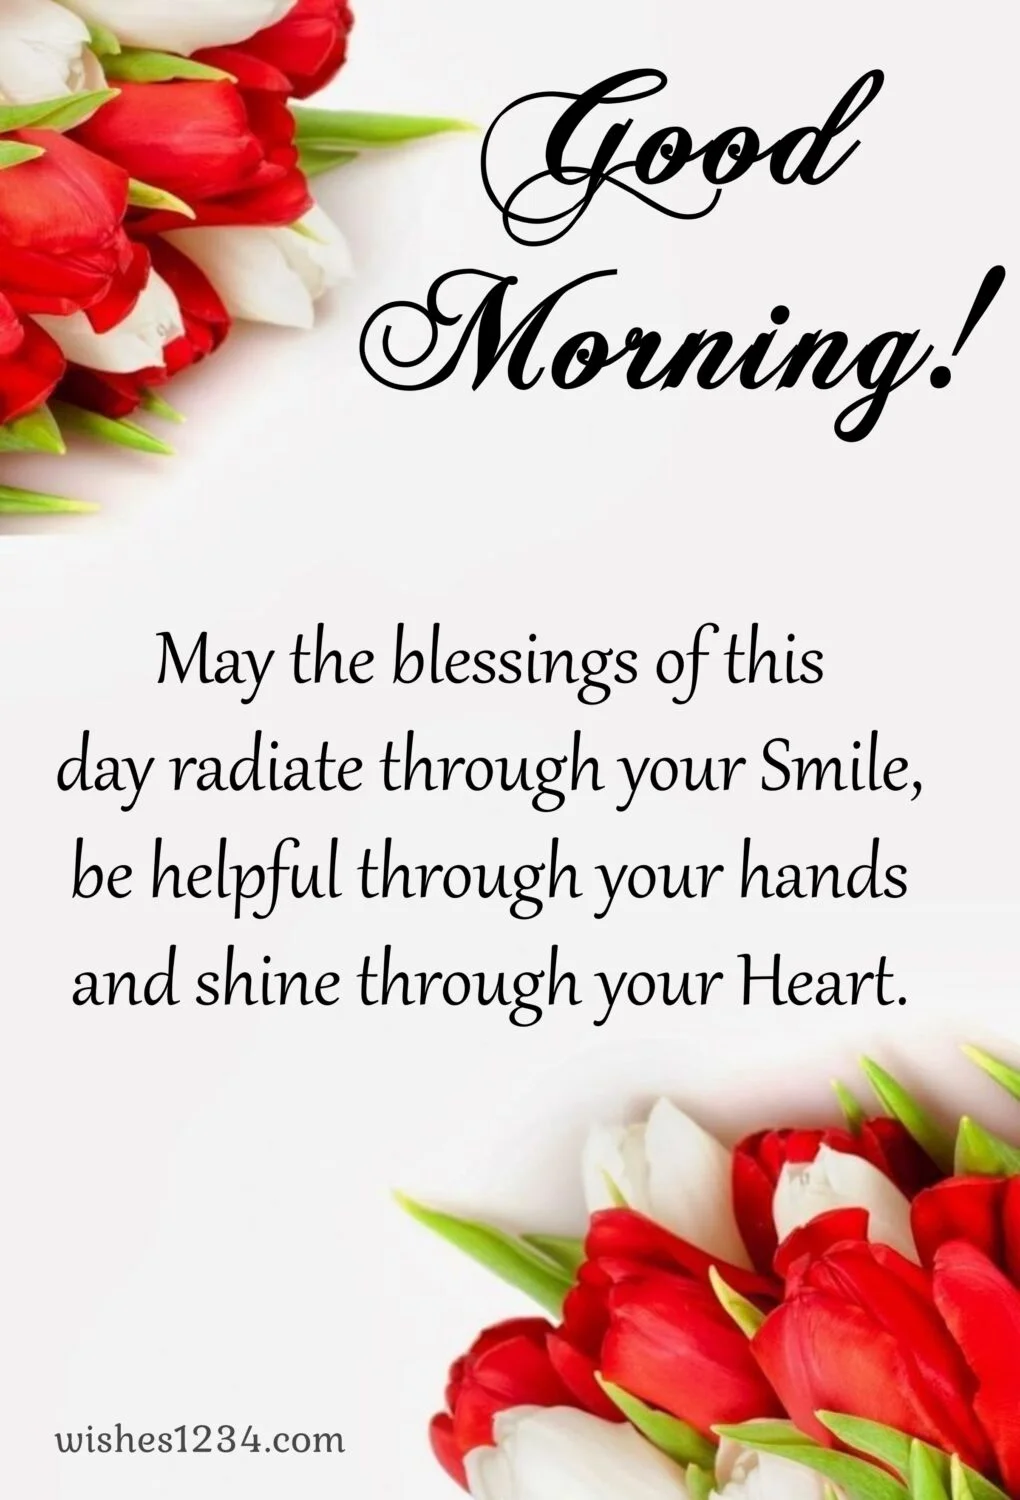 Red & white tulip flowers border, Wednesday Quotes | Wednesday blessings.